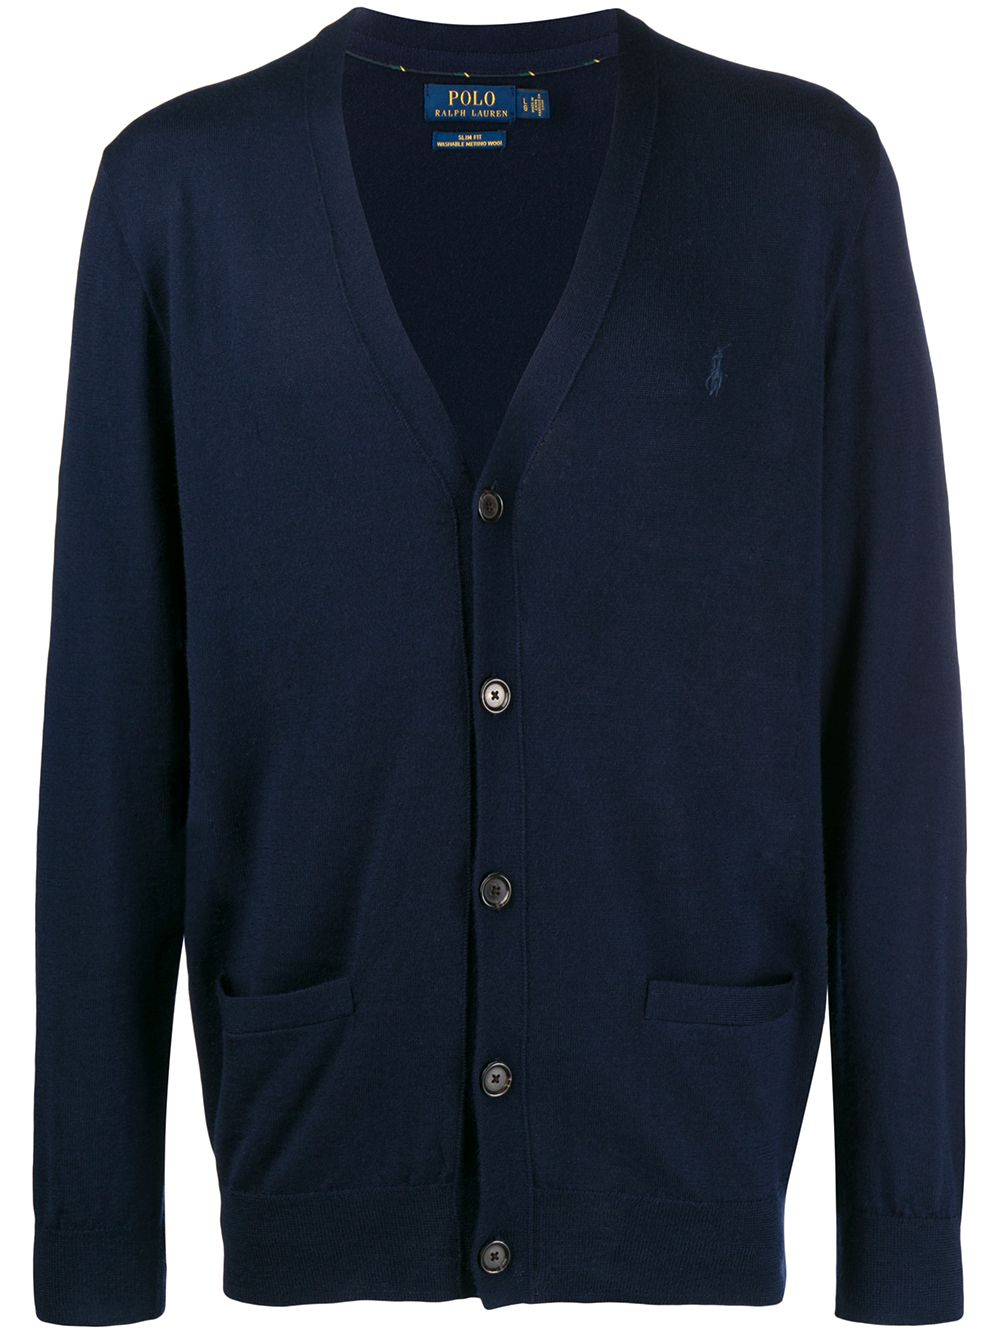 Shop Polo Ralph Lauren plain cardigan with Express Delivery - FARFETCH